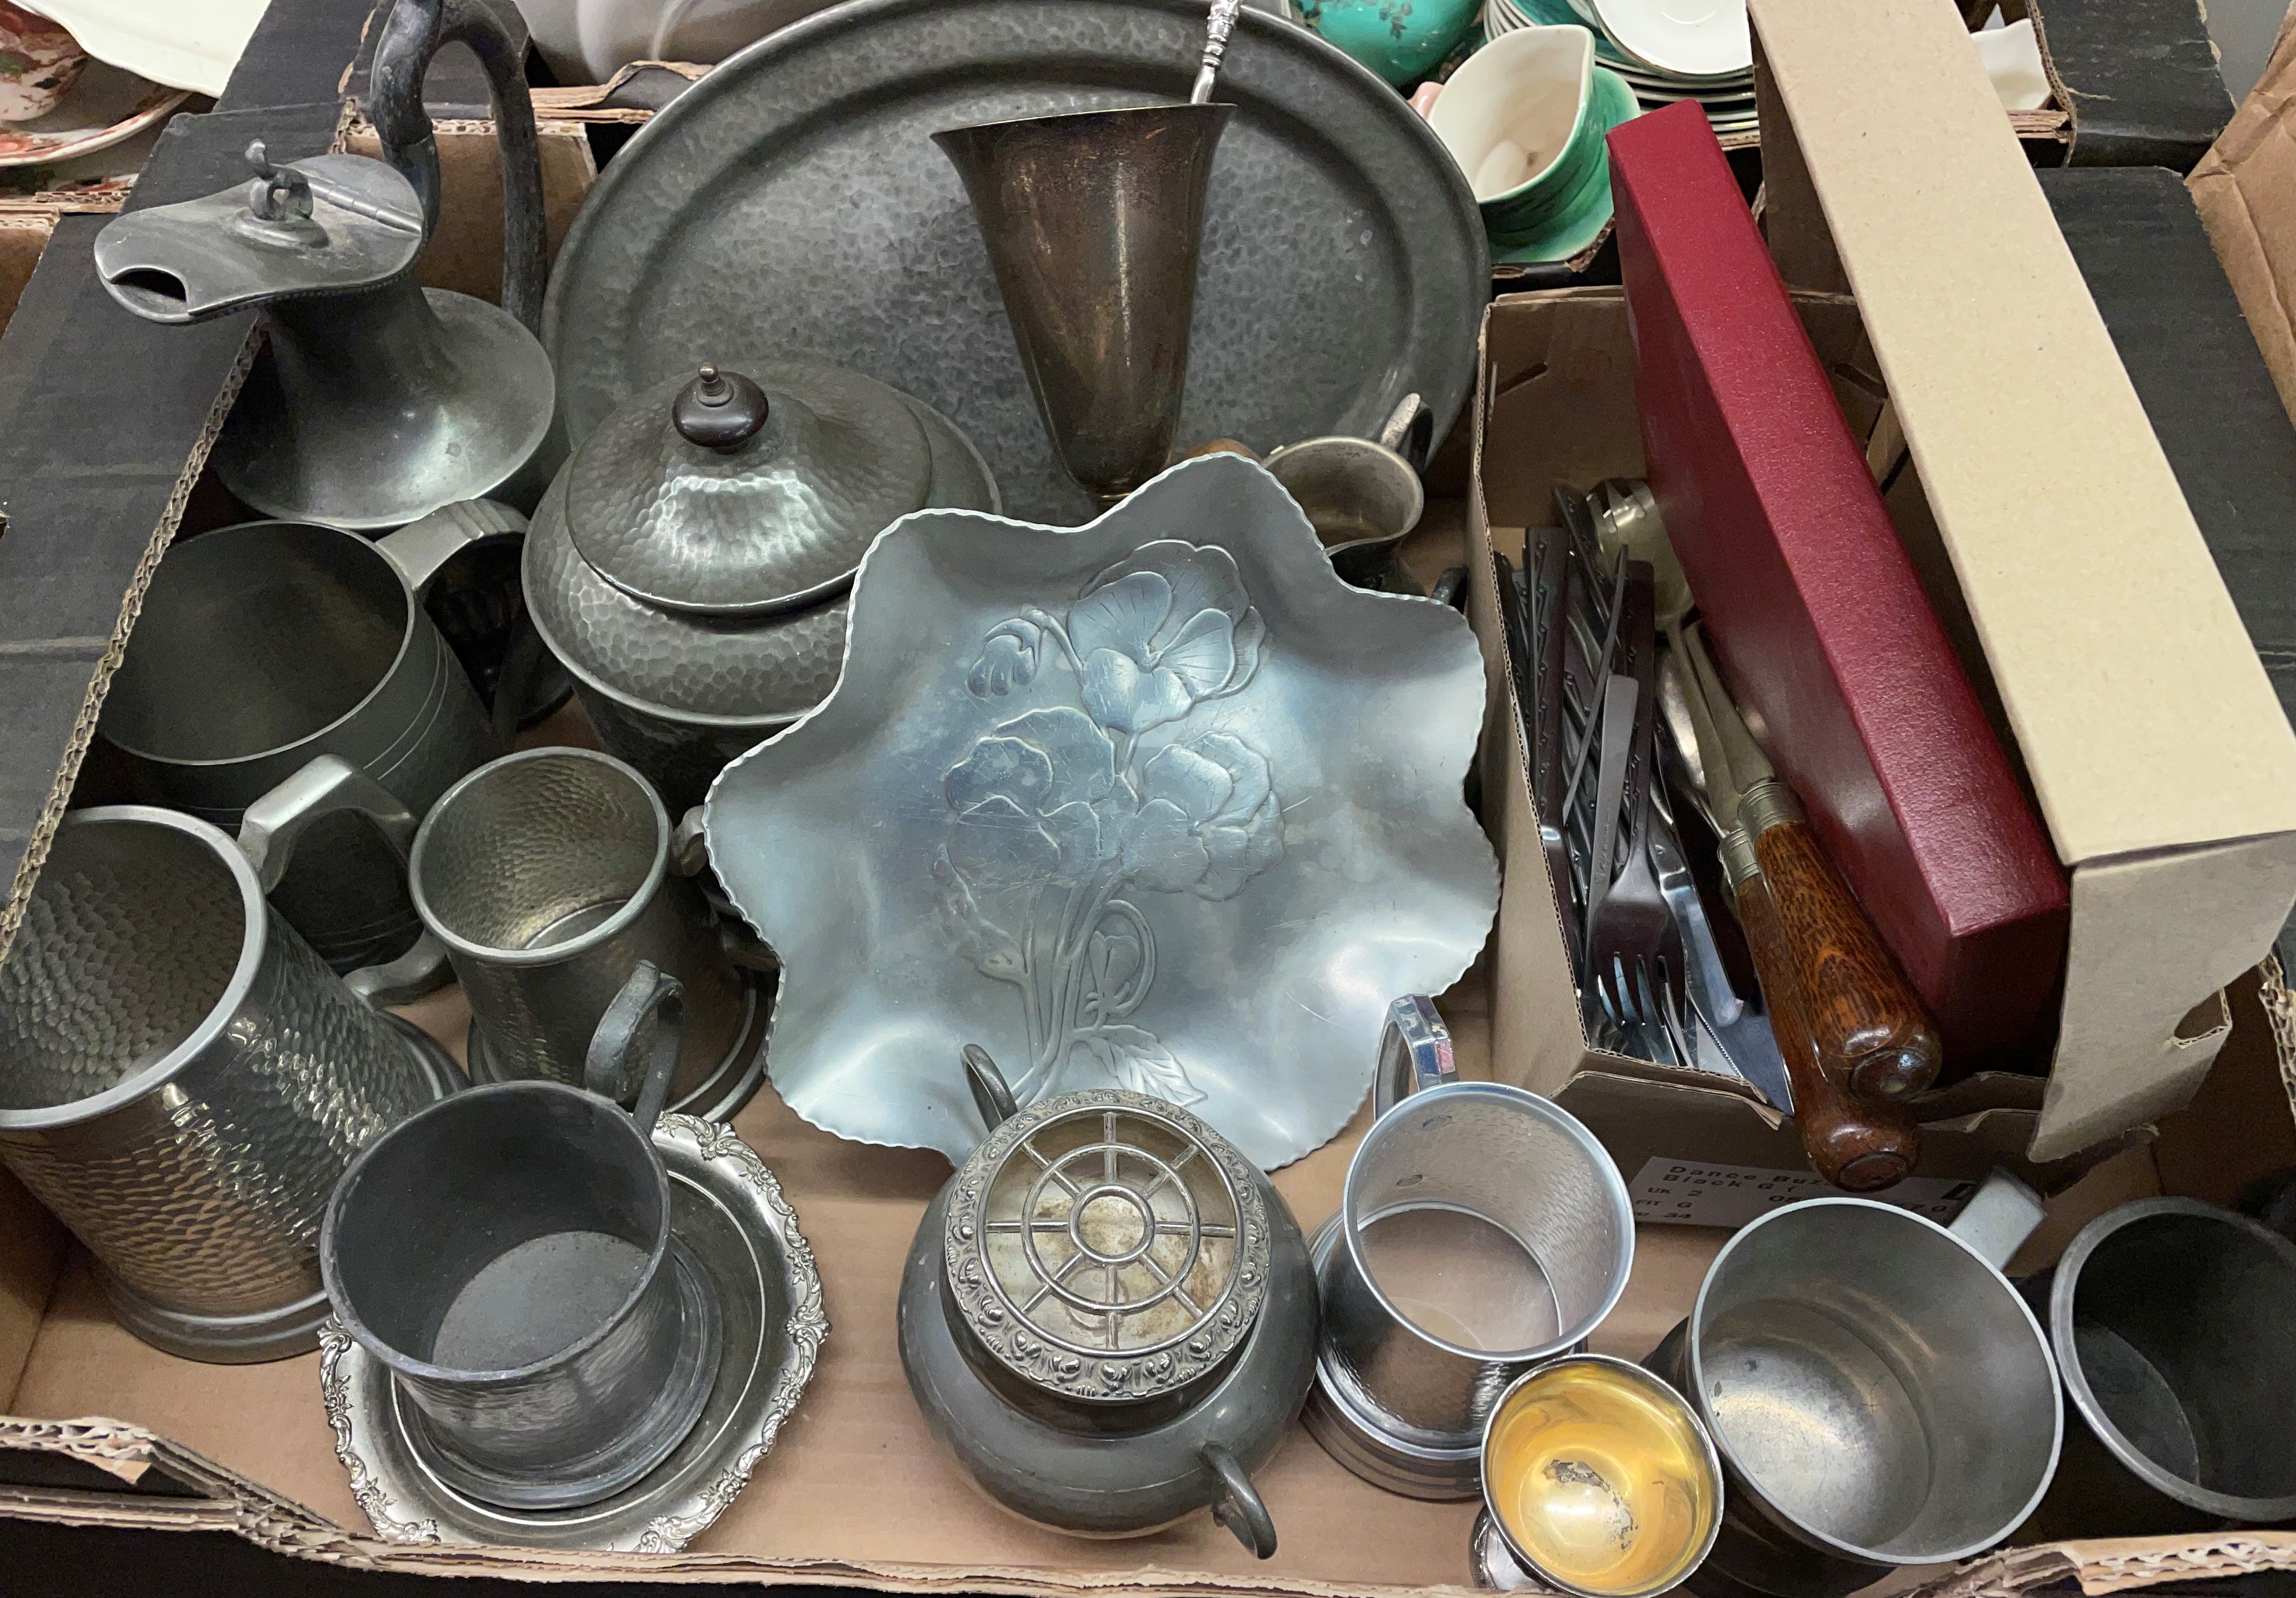 BOX CONTAINING PEWTER BISCUIT BARREL, EPBM WATER JUG, BOX OF VARIOUS CUTLERY, CANADIAN FLORAL DISH,